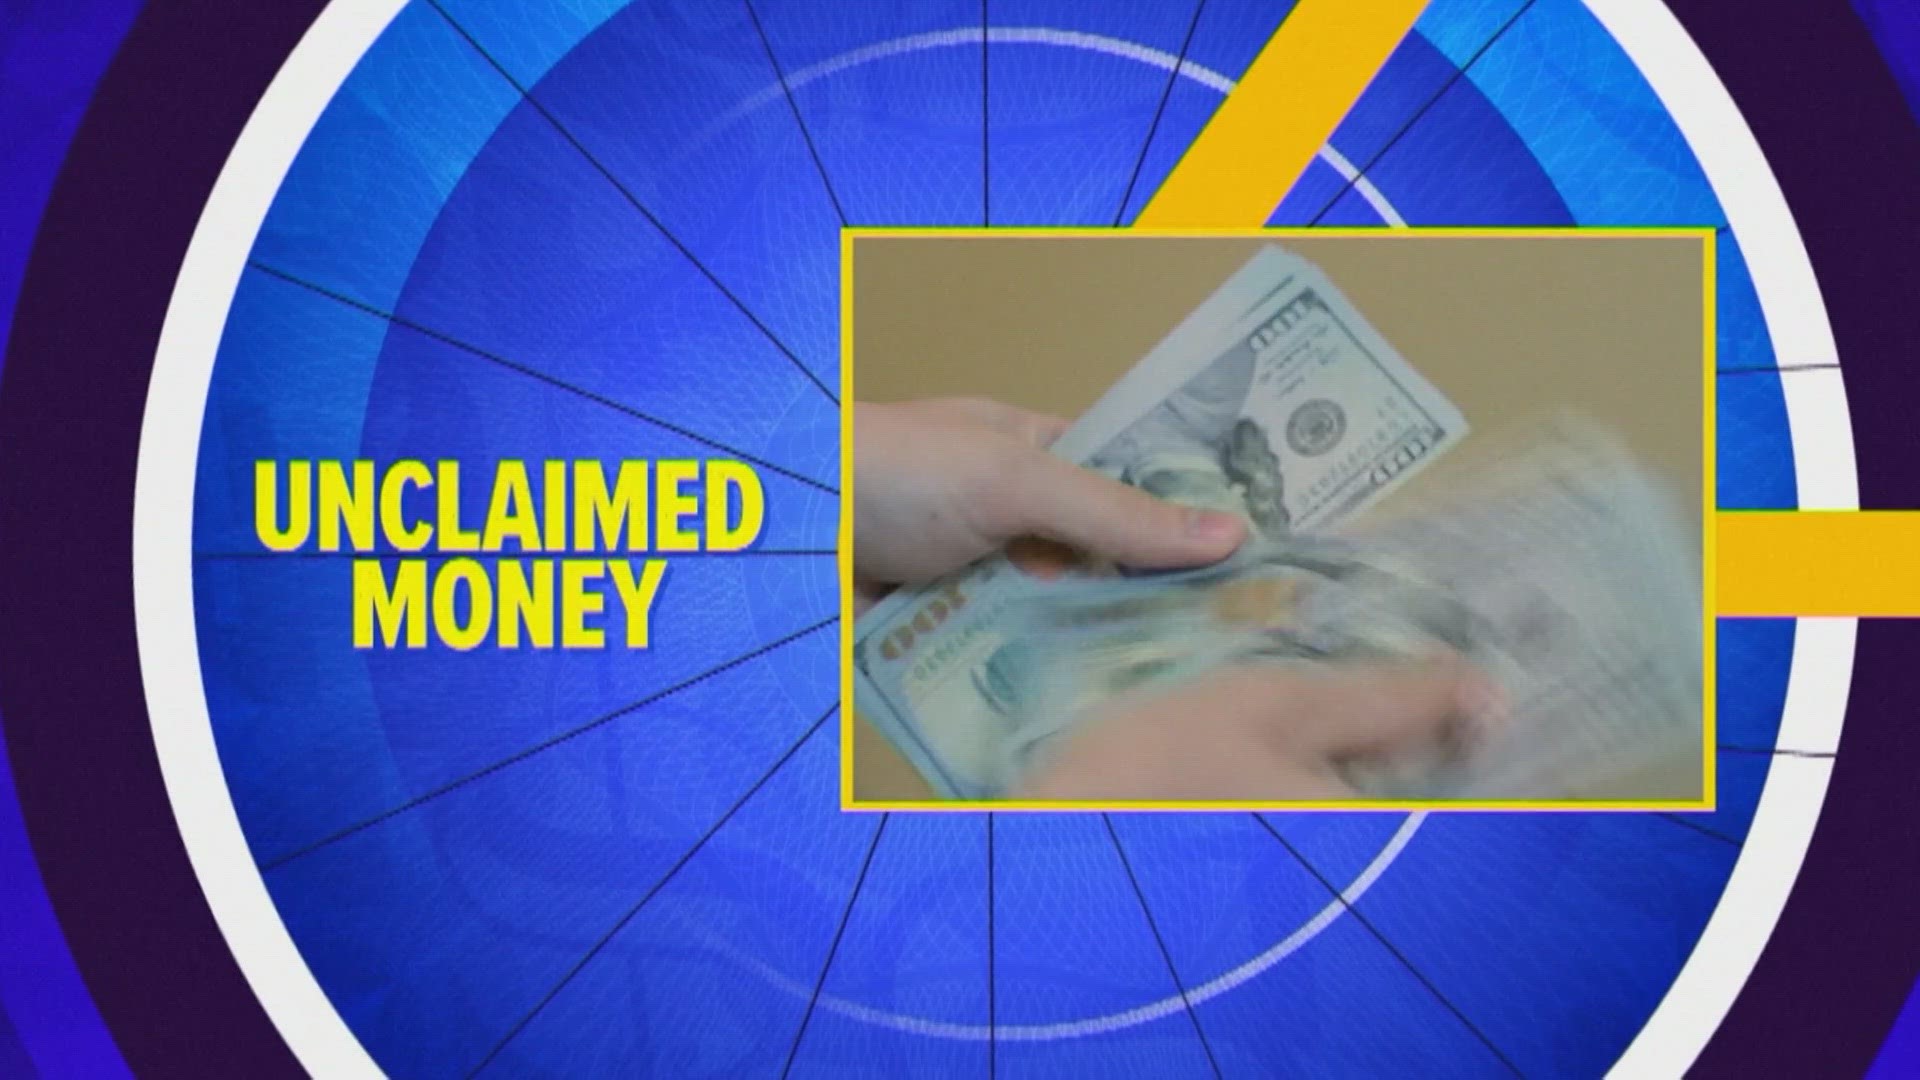 Here's how to find unclaimed money in Texas.